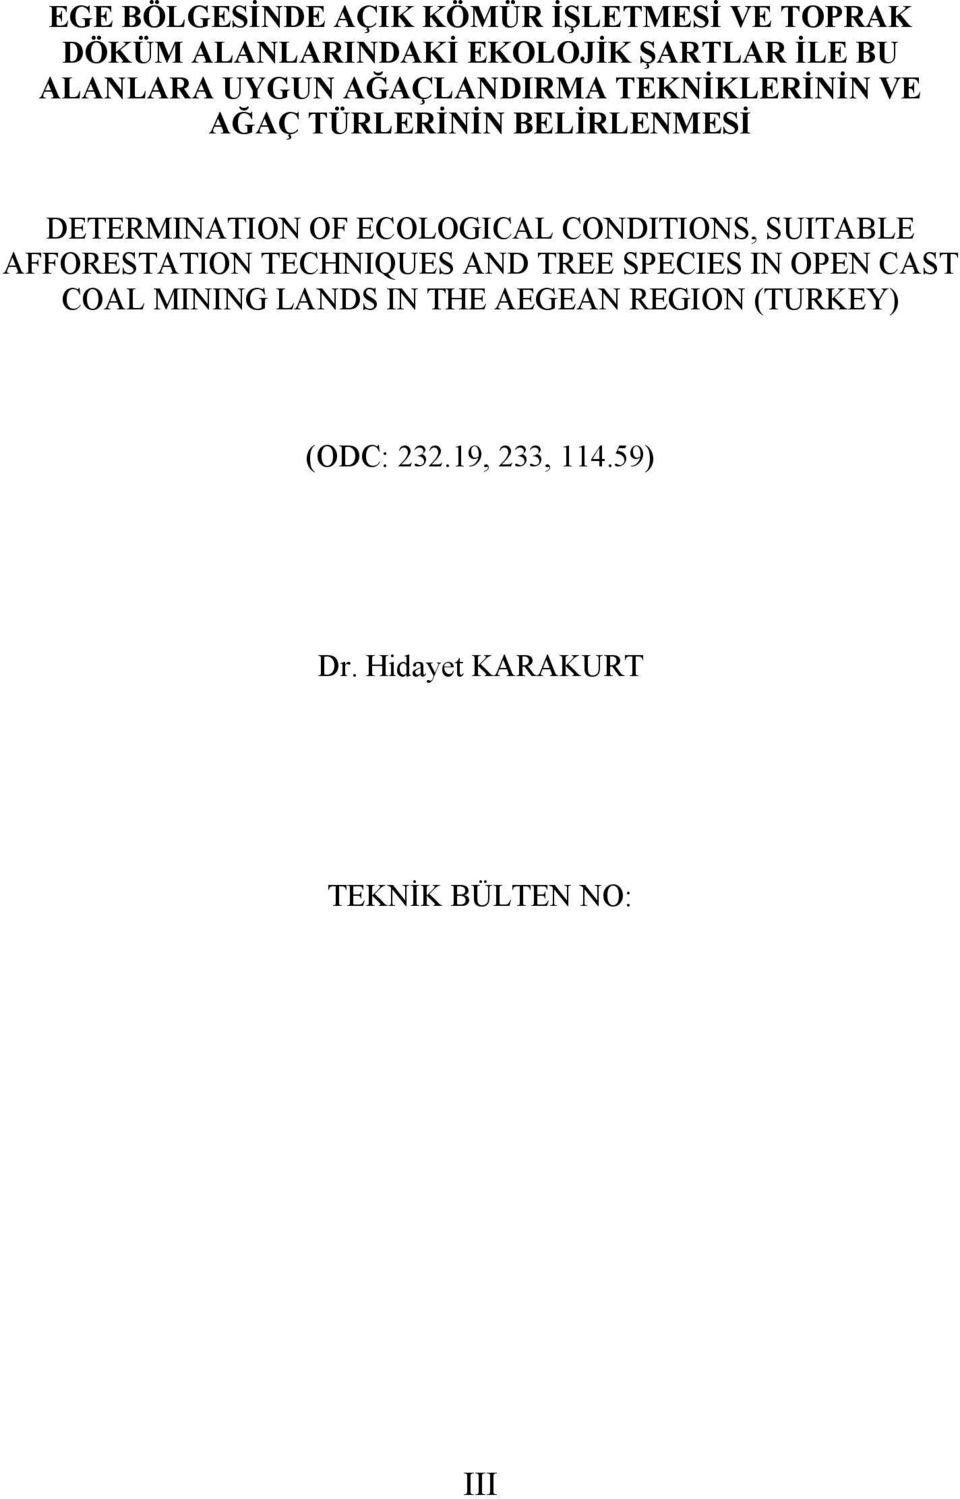 ECOLOGICAL CONDITIONS, SUITABLE AFFORESTATION TECHNIQUES AND TREE SPECIES IN OPEN CAST COAL